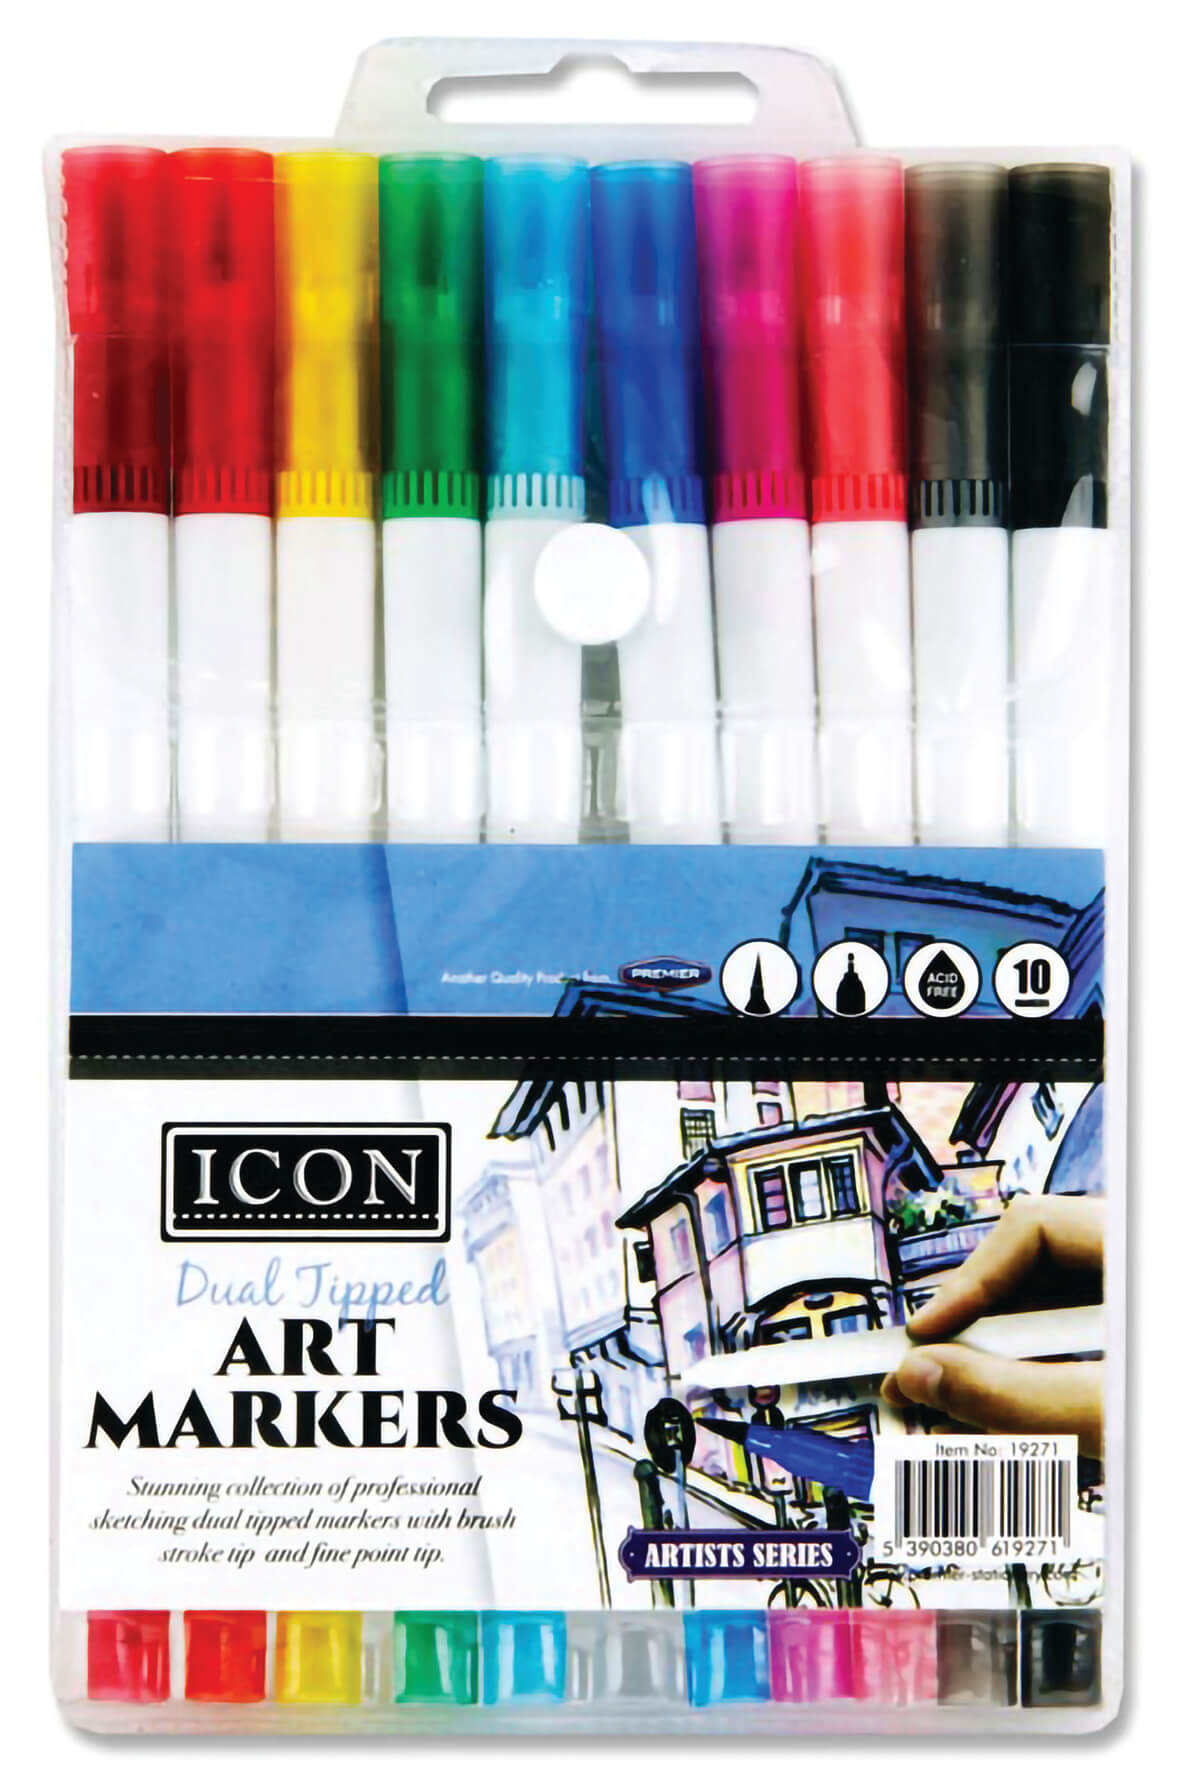 Dual Tipped Art Markers